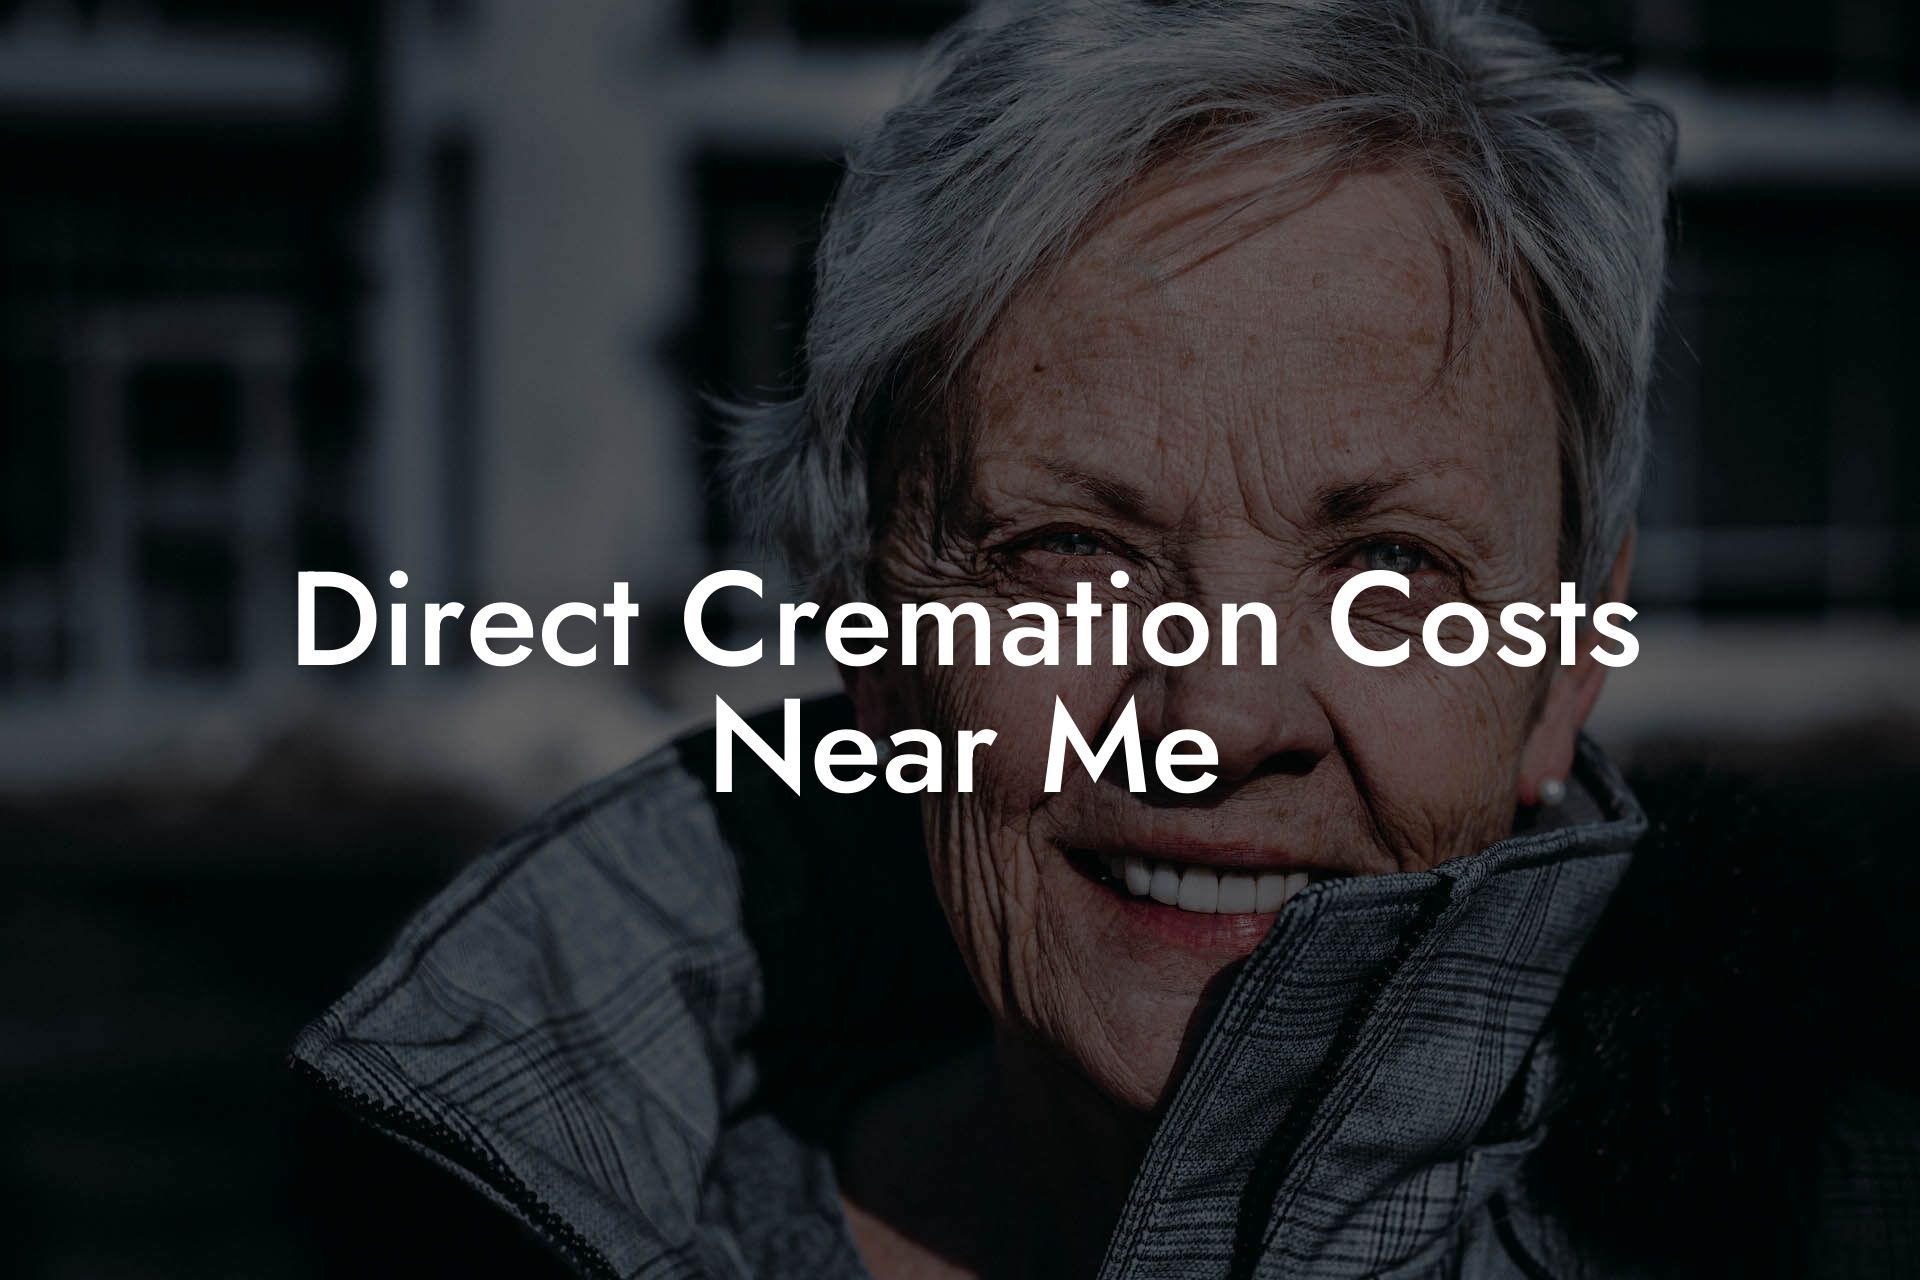 Direct Cremation Costs Near Me